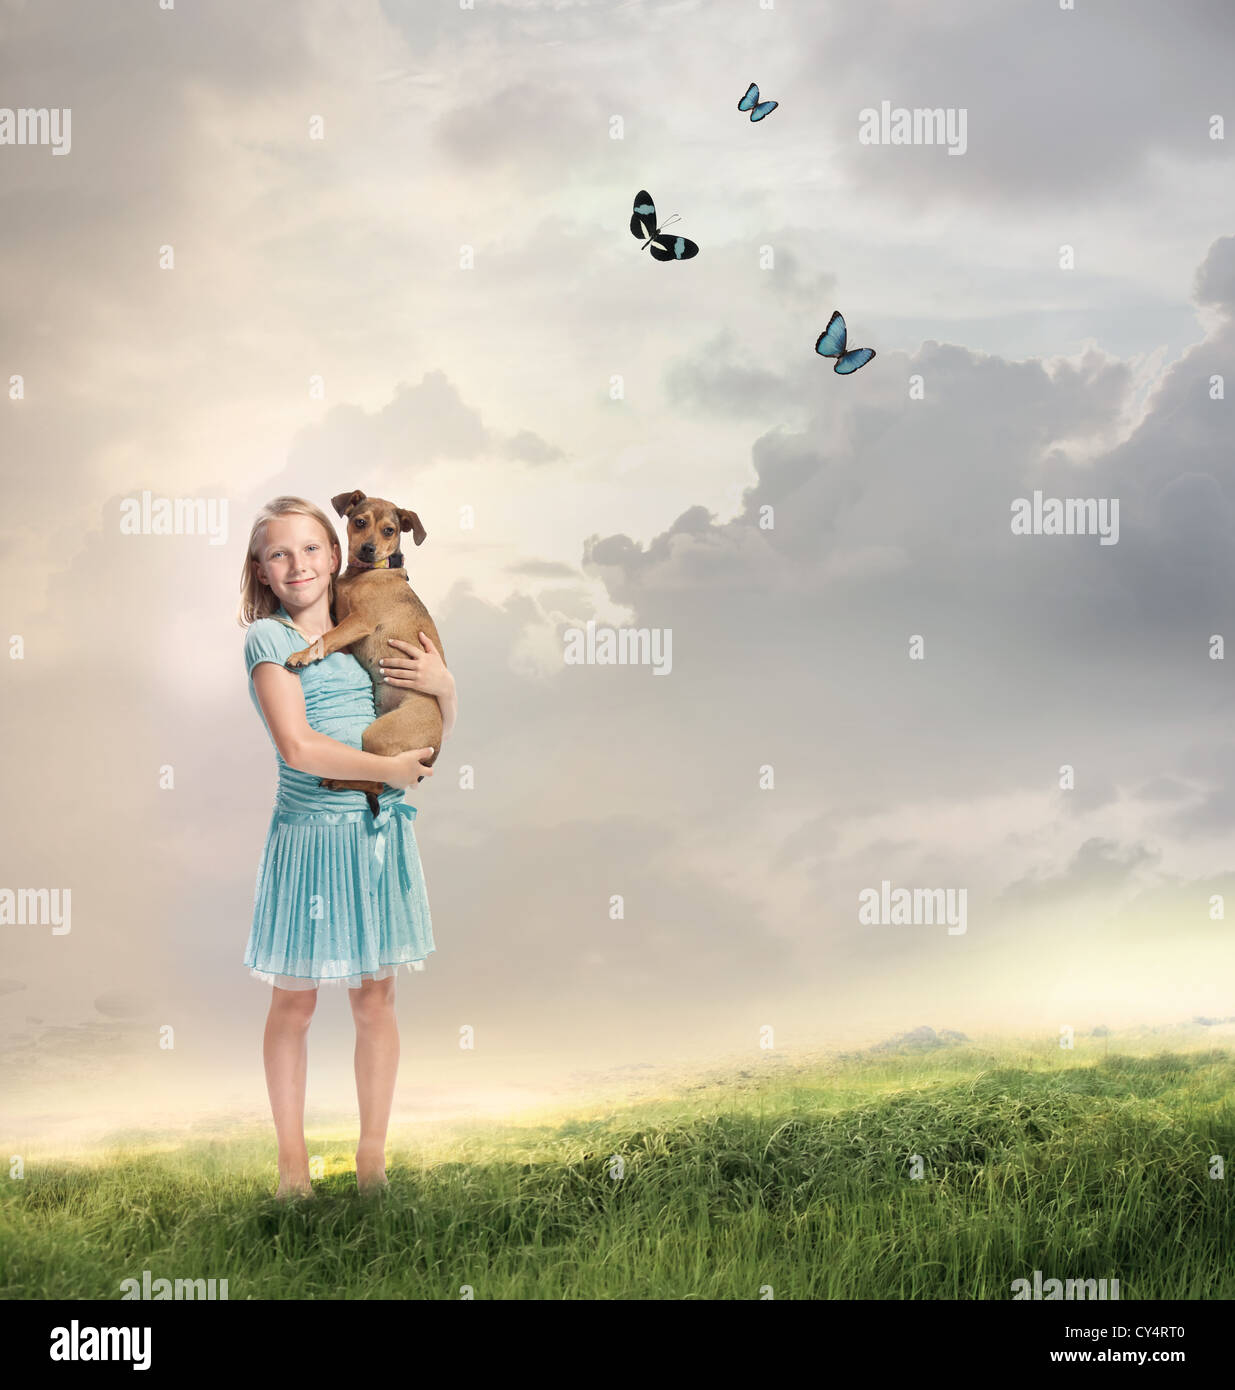 Young Blonde Girl with her Dog on a Magical Mountain Stock Photo